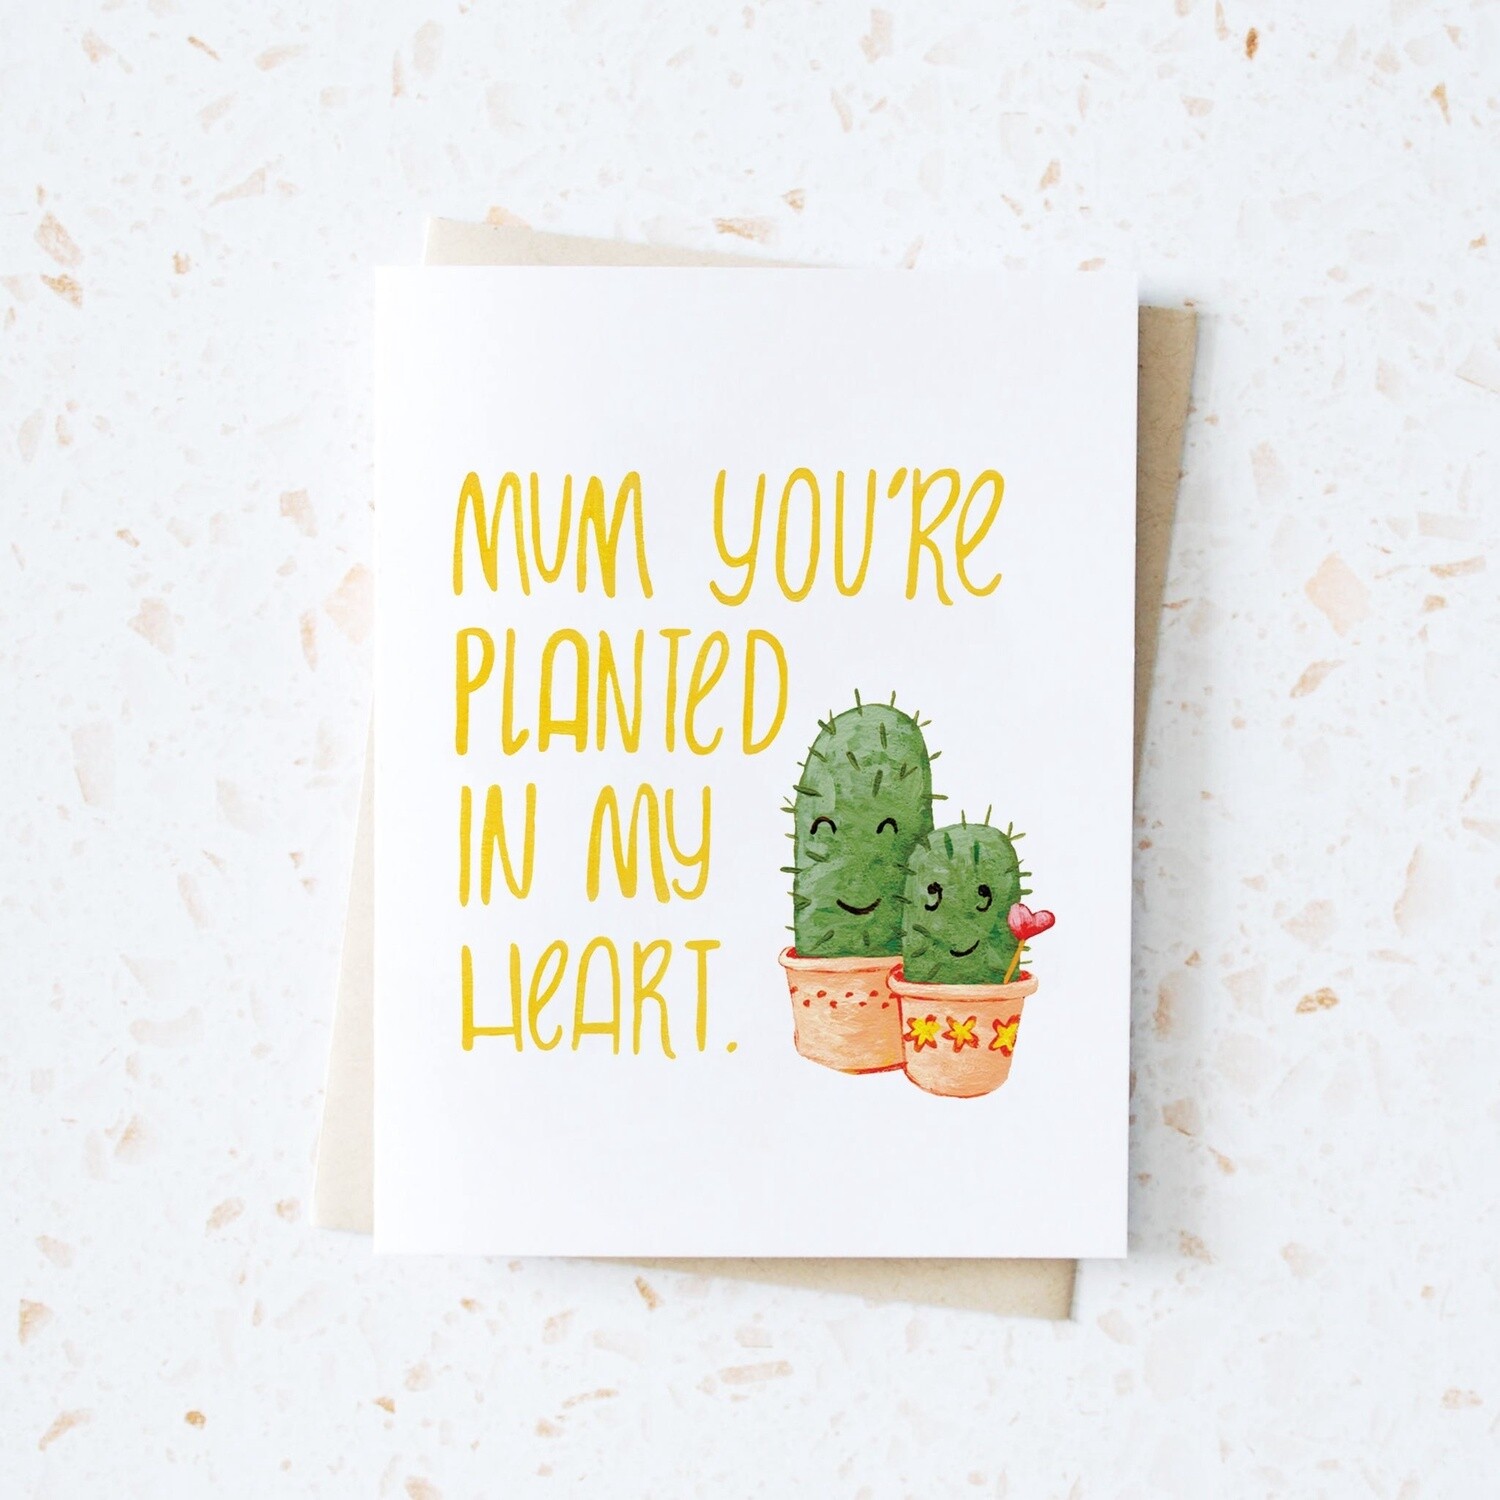 Mum, You're Planted in my Heart